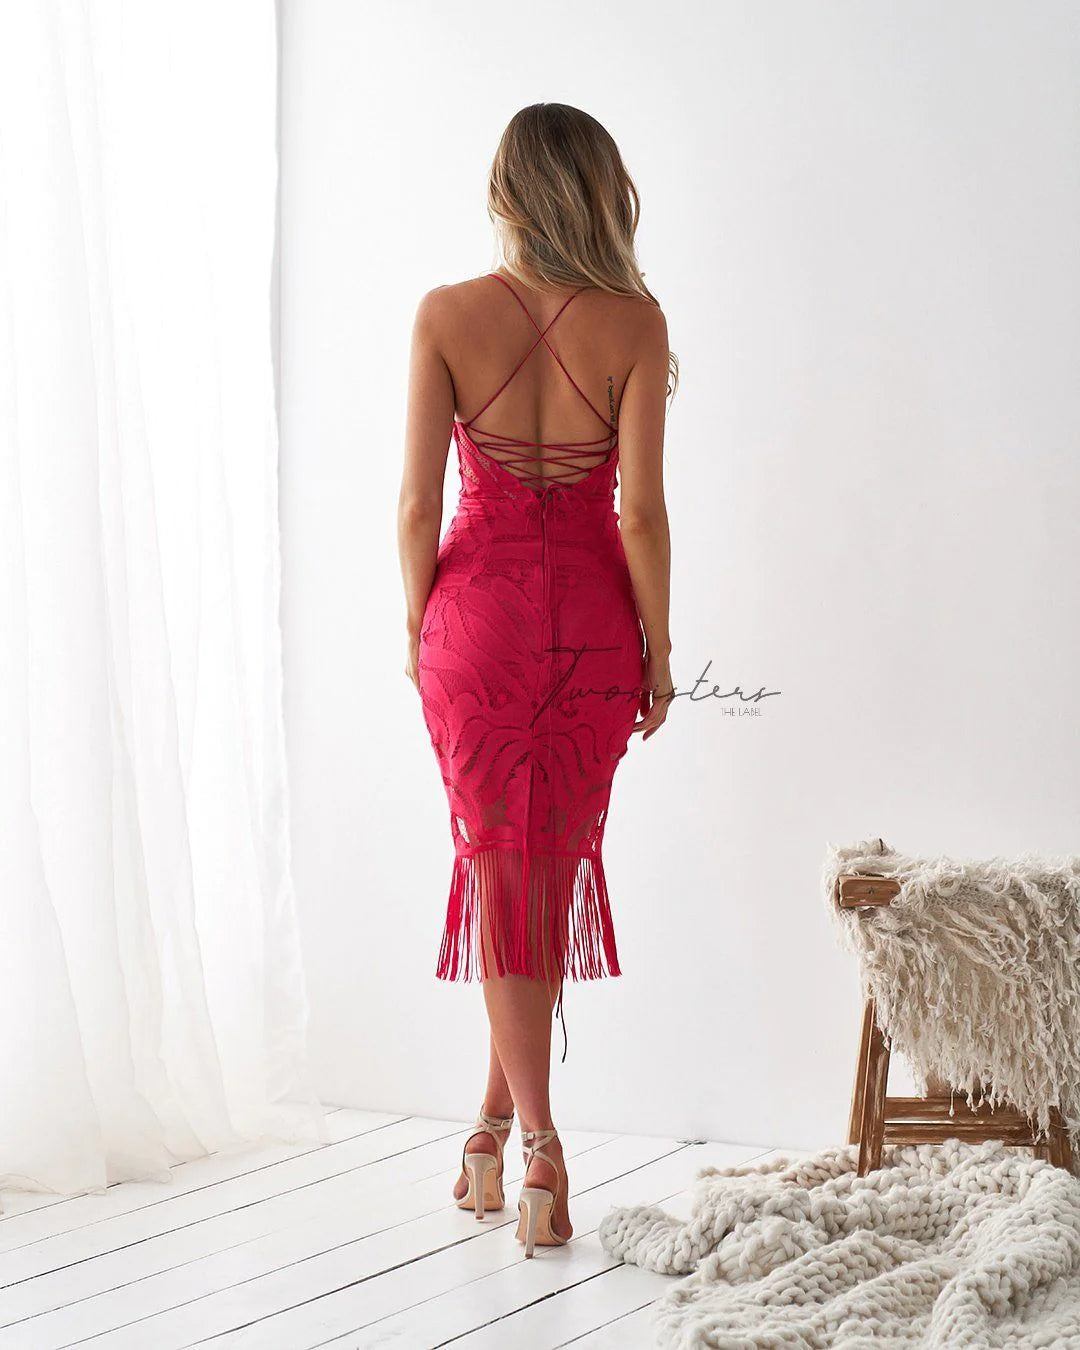 Khaleesi Dress: 
An iconic design, the Twosisters The Label Khaleesi Dress is a statement lace midi. Featuring a flattering v-neckline, lace-up back, tassel hem and finished in a st - Ciao Bella Dresses 